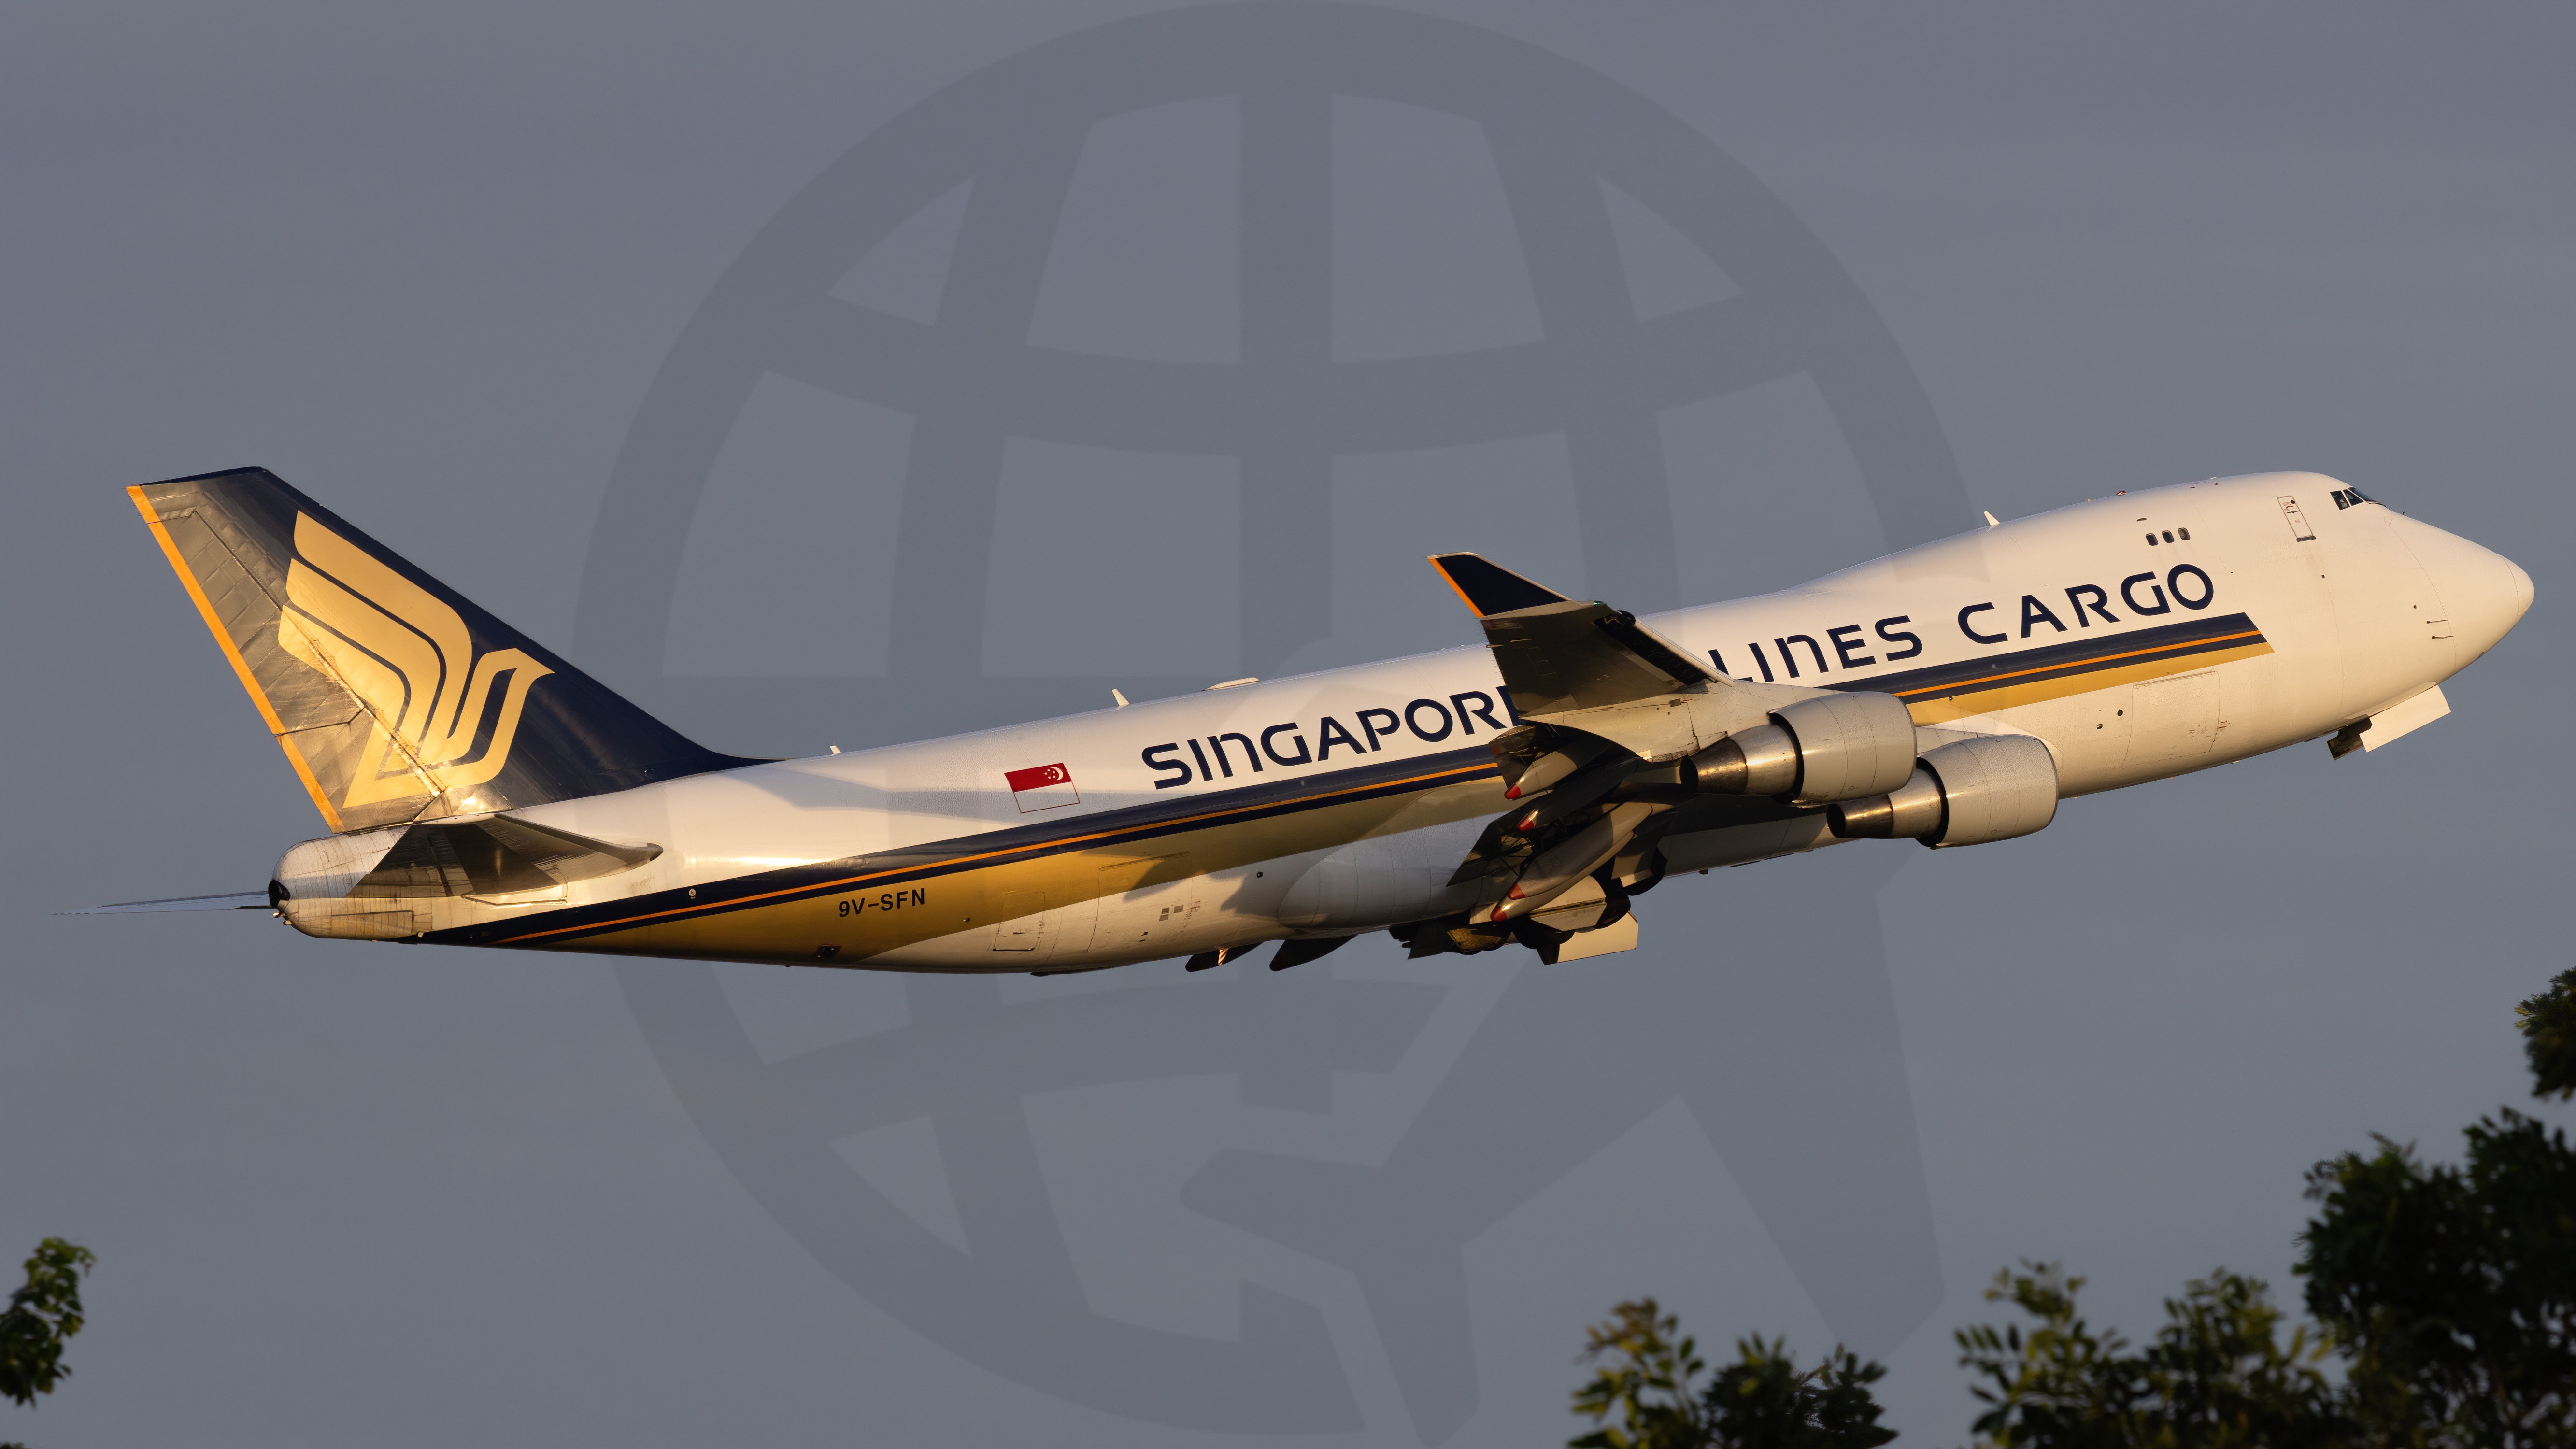 Photo of 9V-SFN - Singapore Airlines Cargo Boeing 747-400F by 